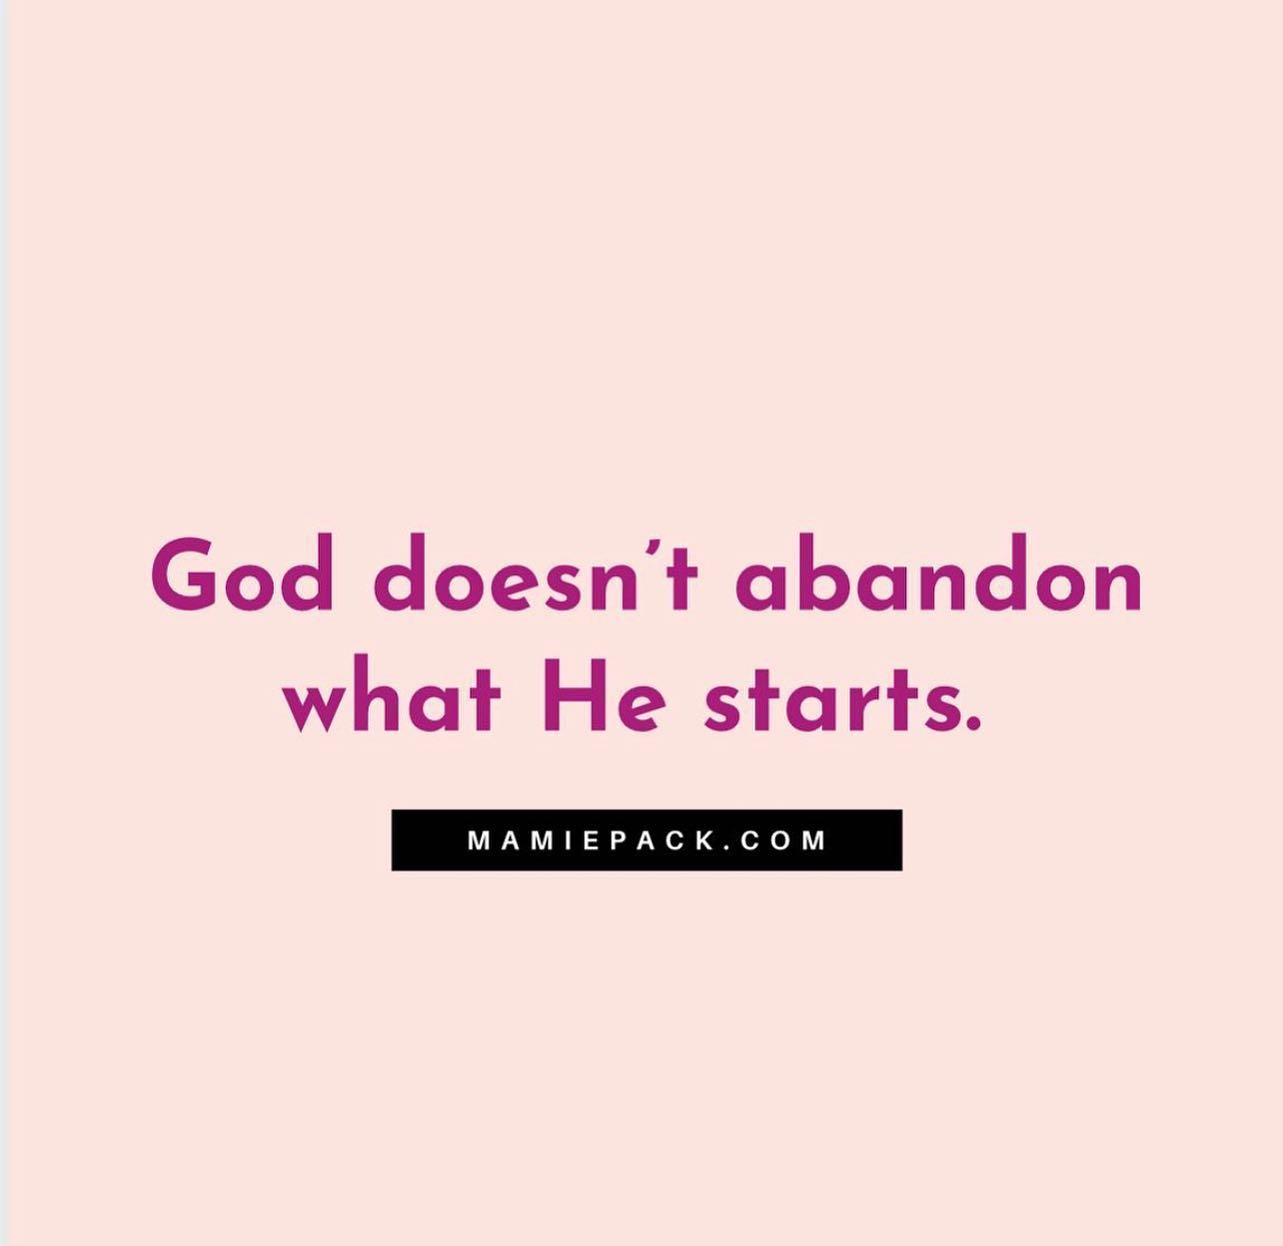 Reminder: God doesn’t abandon what He starts. Nothing in Him is unfinished, incomplete, or without purpose.

This includes you.

You are not a part time project. You are a beloved daughter of the king.

So, choose TODAY to praise God in the midst.

Even if we can’t see the solution. 
Even if we don’t have the answer. 
Even if our current season is uncomfortable.

We can praise because we are CONFIDENT (no doubt, completely unwavering belief) Christ will finish the work HE started in us.

Lean in.
Read His word.
Put a praise in your mouth. 
Pray. 
Align.

Declare His truth over your life with any of our “I am” products.  Use them as daily reminders of your kingdom identity. 

And I am sure of this, that he who began a good work in you will bring it to completion at the day of Jesus Christ.
Philippians‬ ‭1:6‬ ‭ESV‬‬.
.
.
.
.
.
.
#fearfullyandwonderfullymade #fearfullymade #kingdomperspective #gracefullybroken #godsmasterpiece #lovedbyGod #christianwomenleaders #christianwomeninbusiness #christianbossbabe #gritandgrace #stylishstationery #mamielpackmedia #faithjourney #faithquotes #christiancreative #christiancreativecommunity #womenintheword #soulscripts #graceandmercy #graceandgratitude #gritandgrace #gritandgracelife